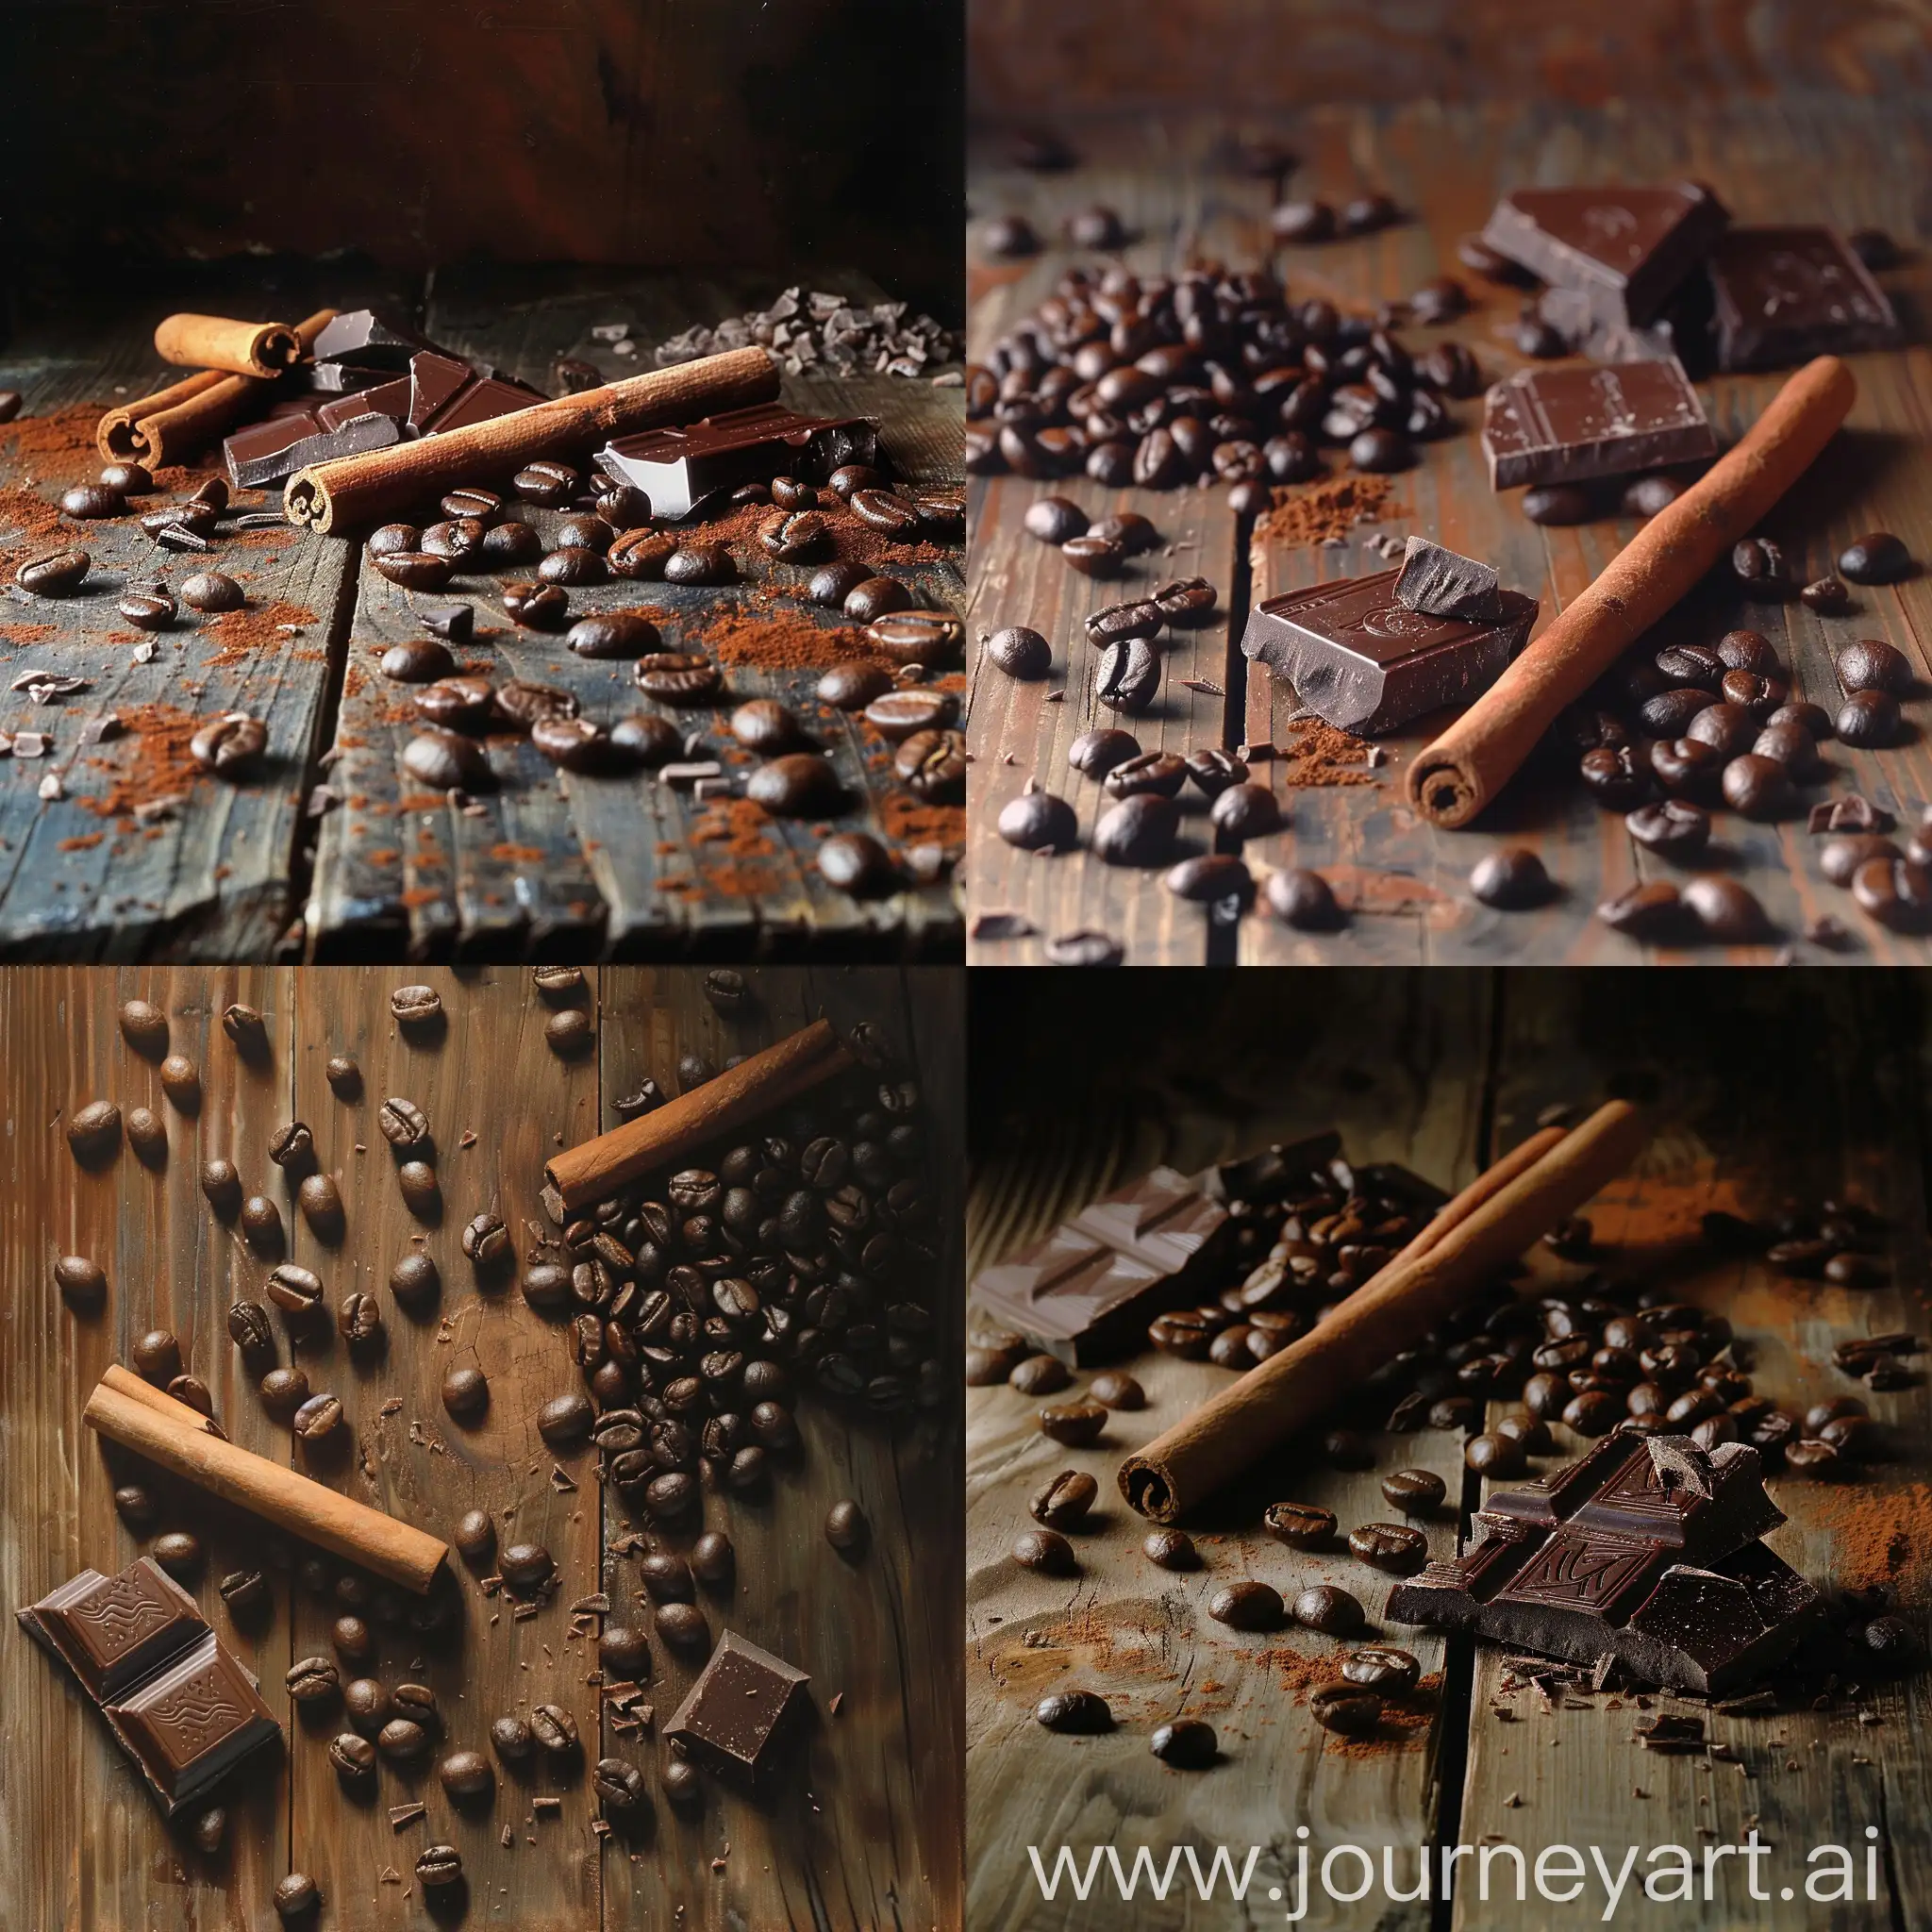 Rustic-Coffee-Table-with-Scattered-Beans-and-Chocolate